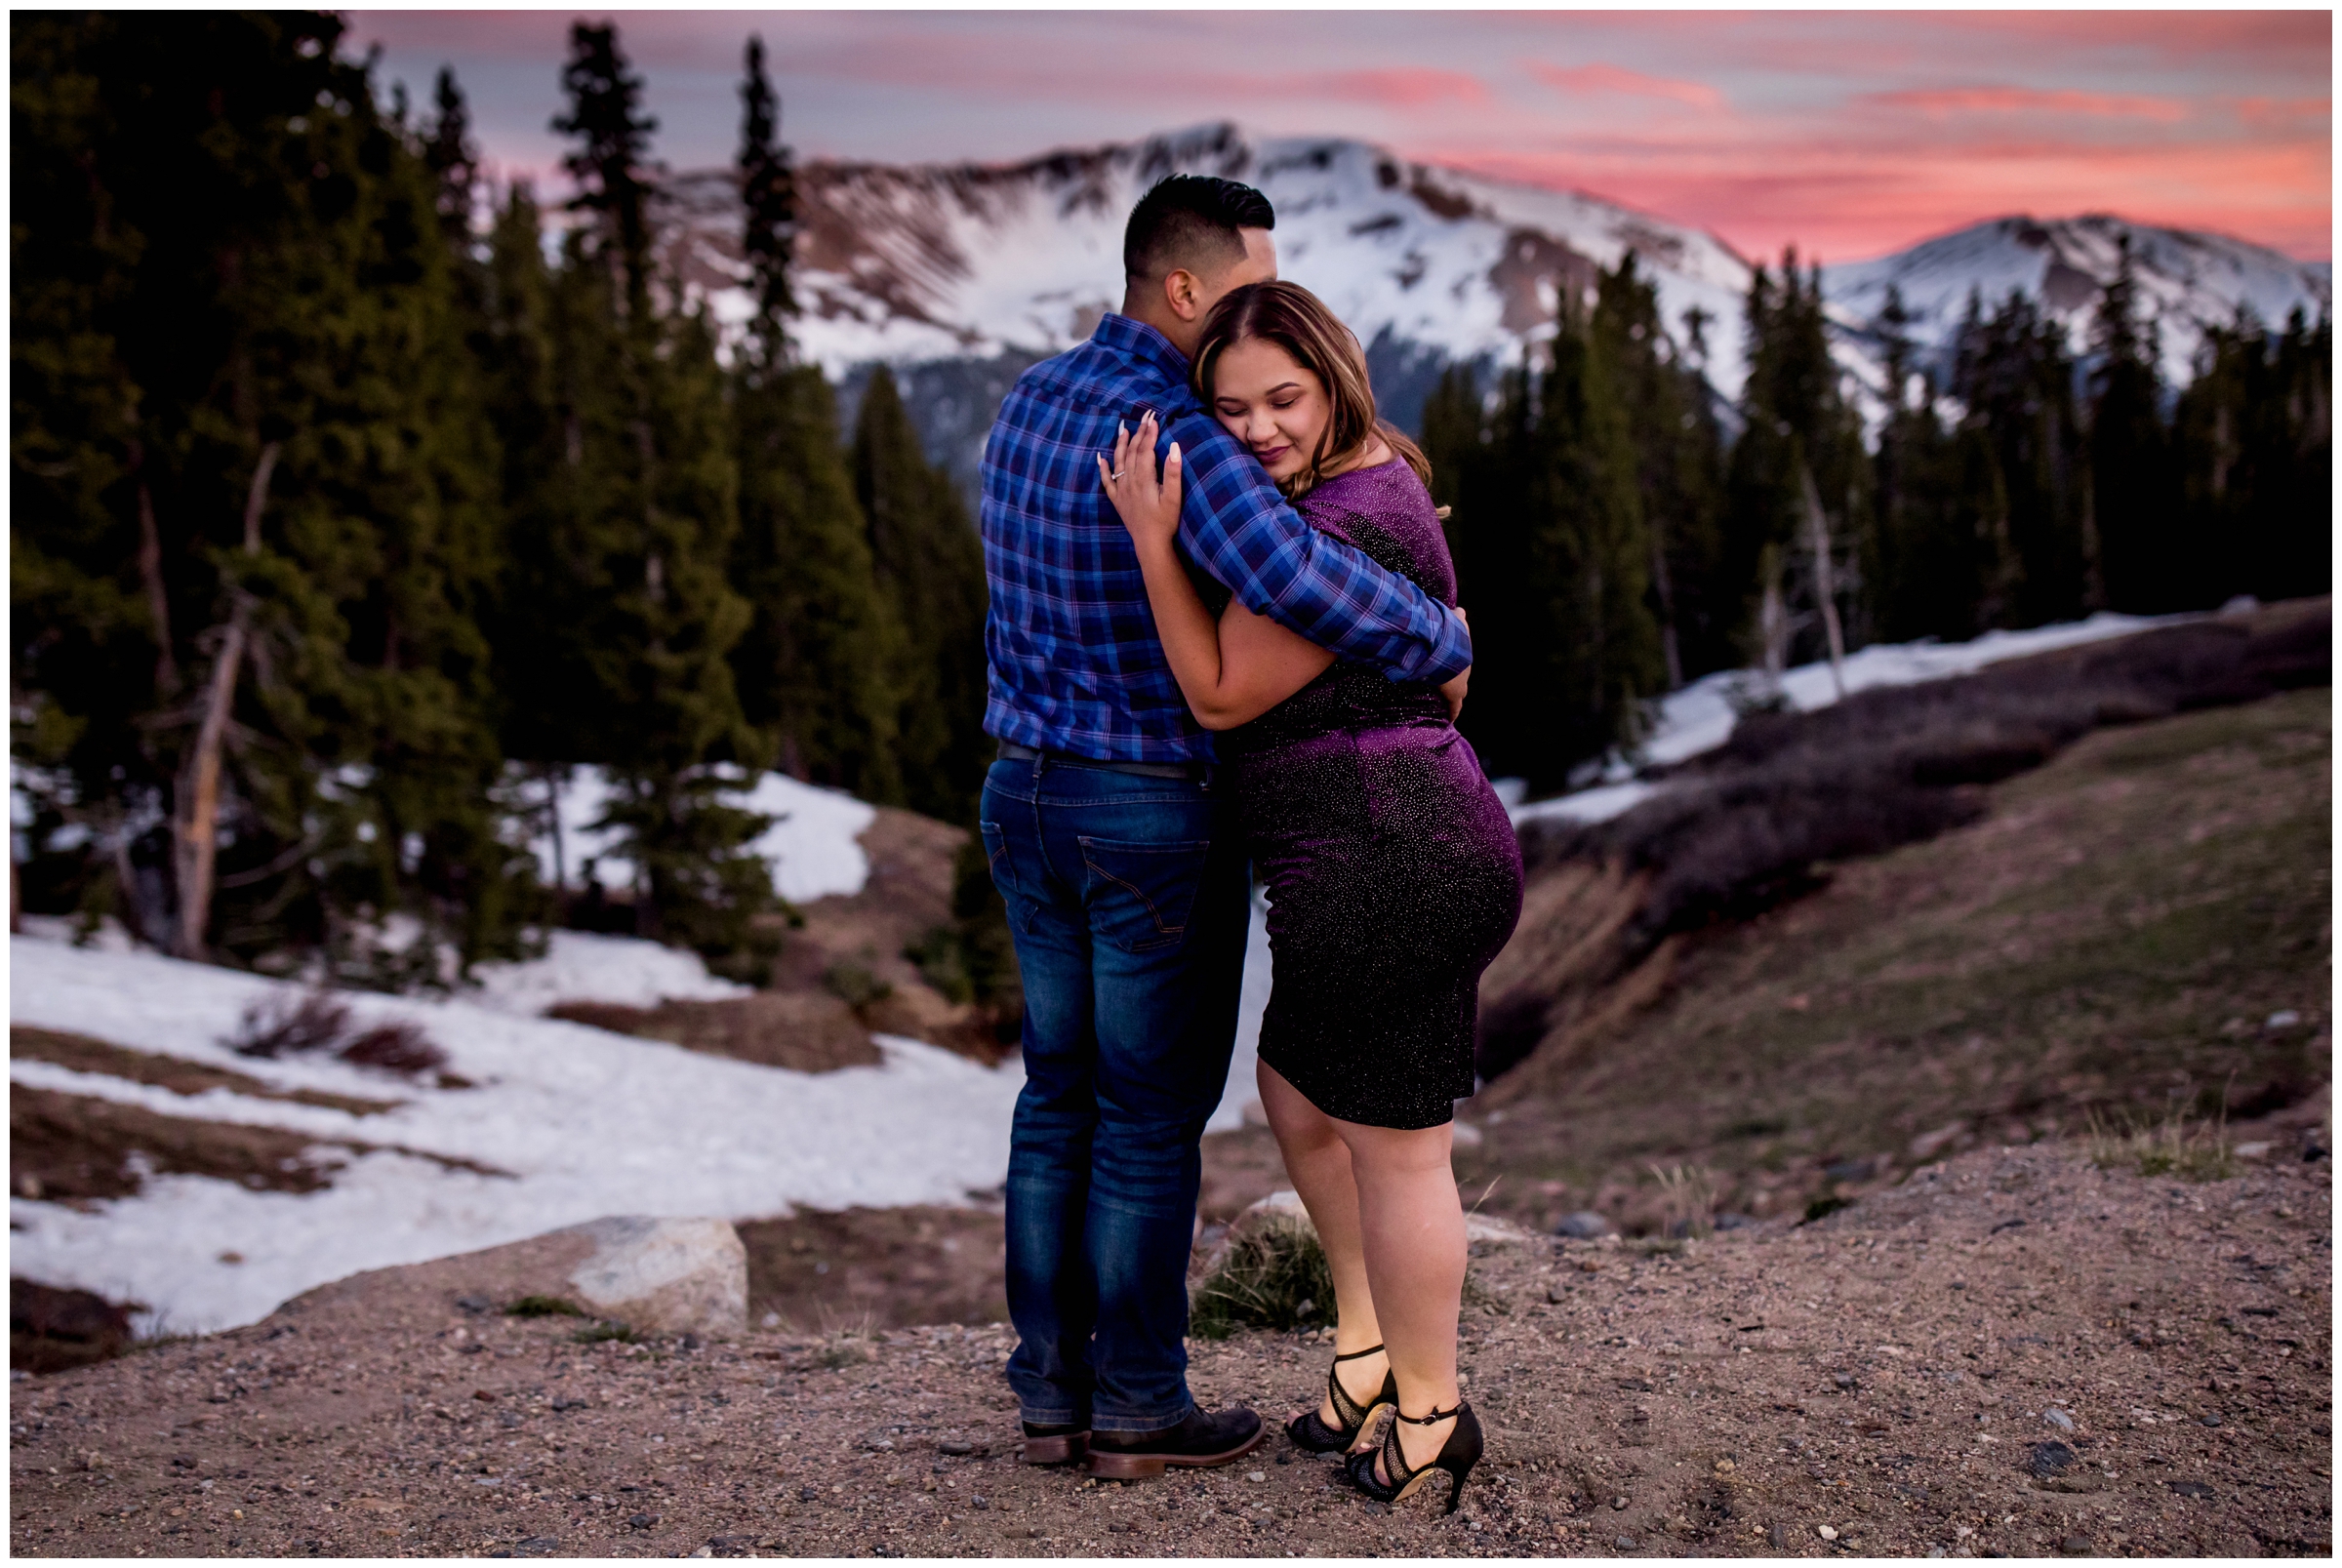 colorful mountain sunset engagement photography inspiration by Winter Park photographer Plum Pretty Photography 